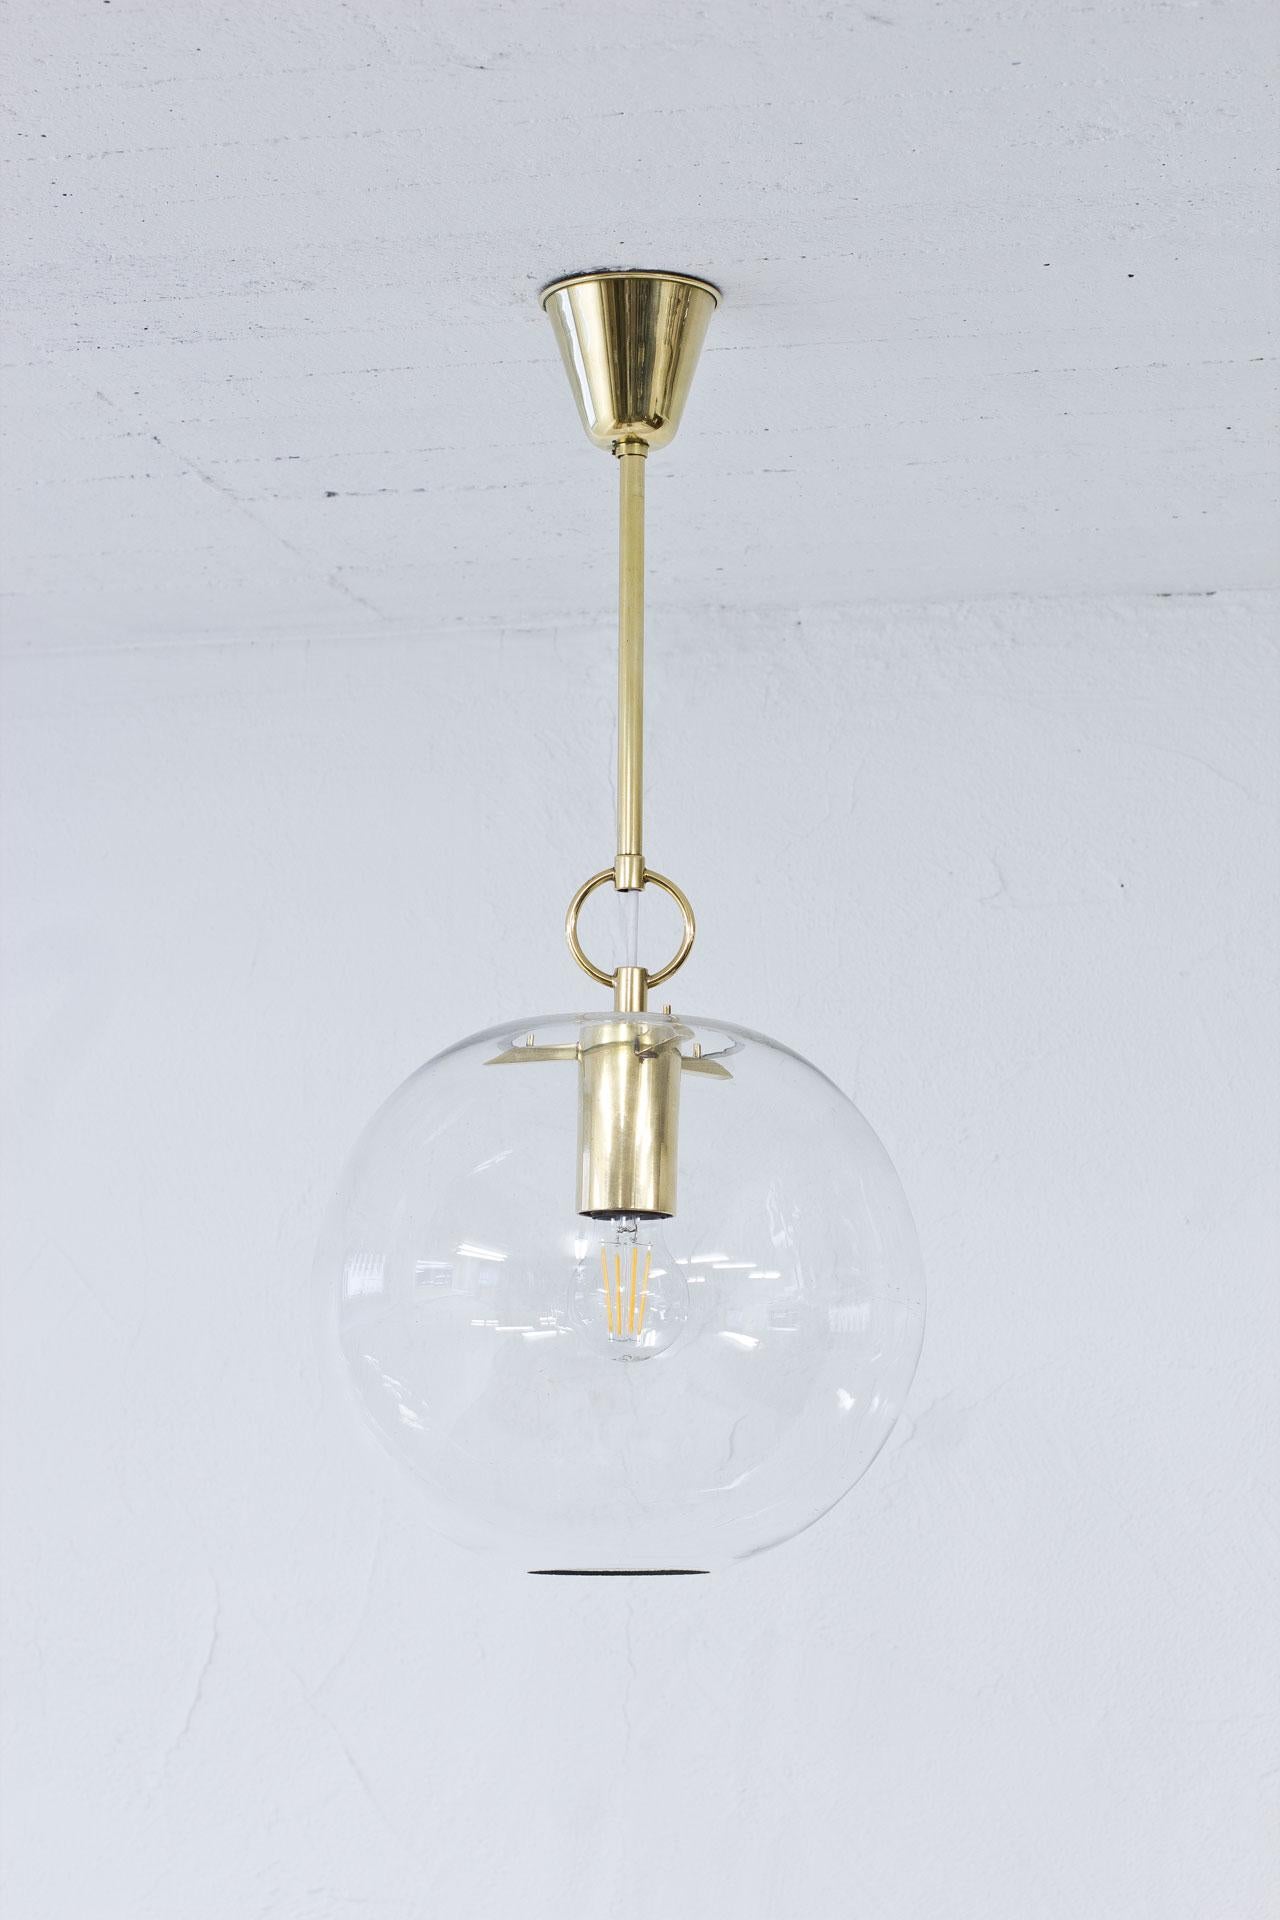 Pendant lamp designed and manufactured by Hans-Agne Jakobsson in Sweden during the 1950s.
Brass fittings with original clear glass shade.